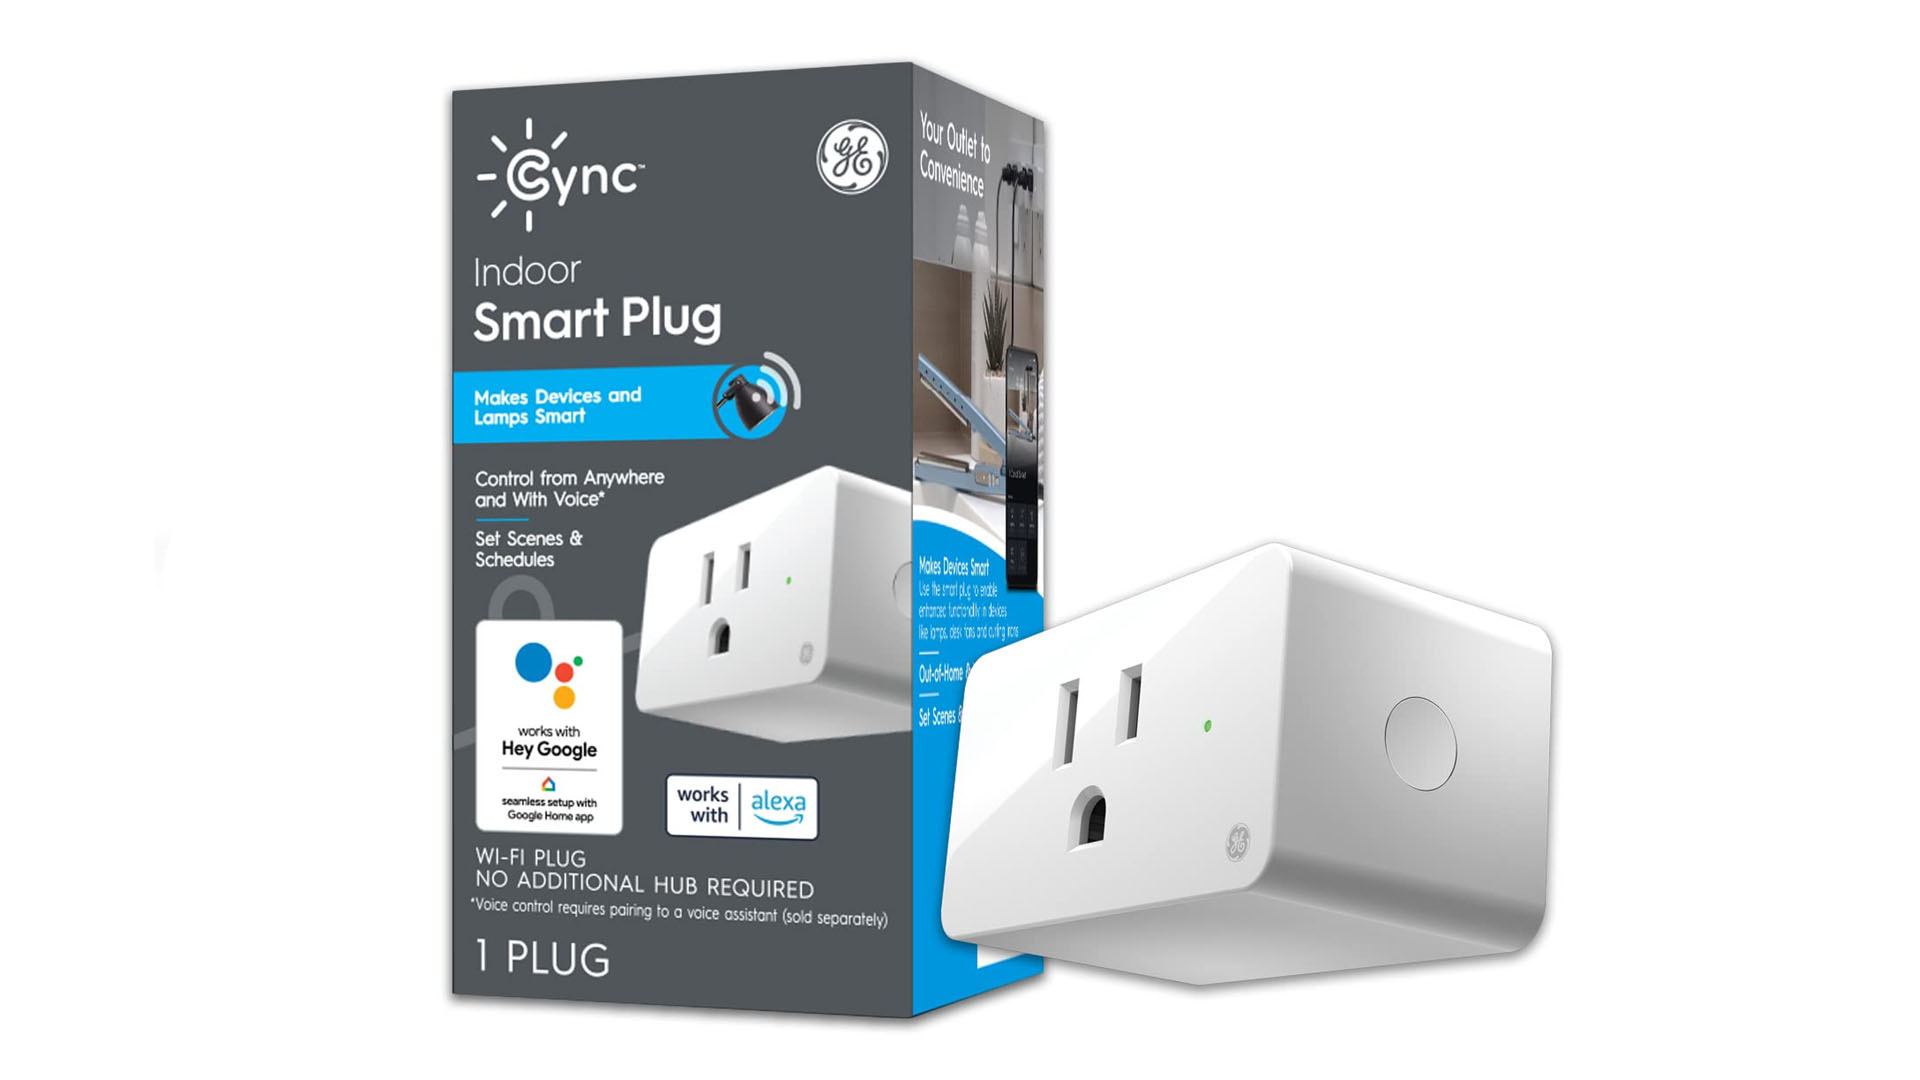 ge cync smart plugs best features